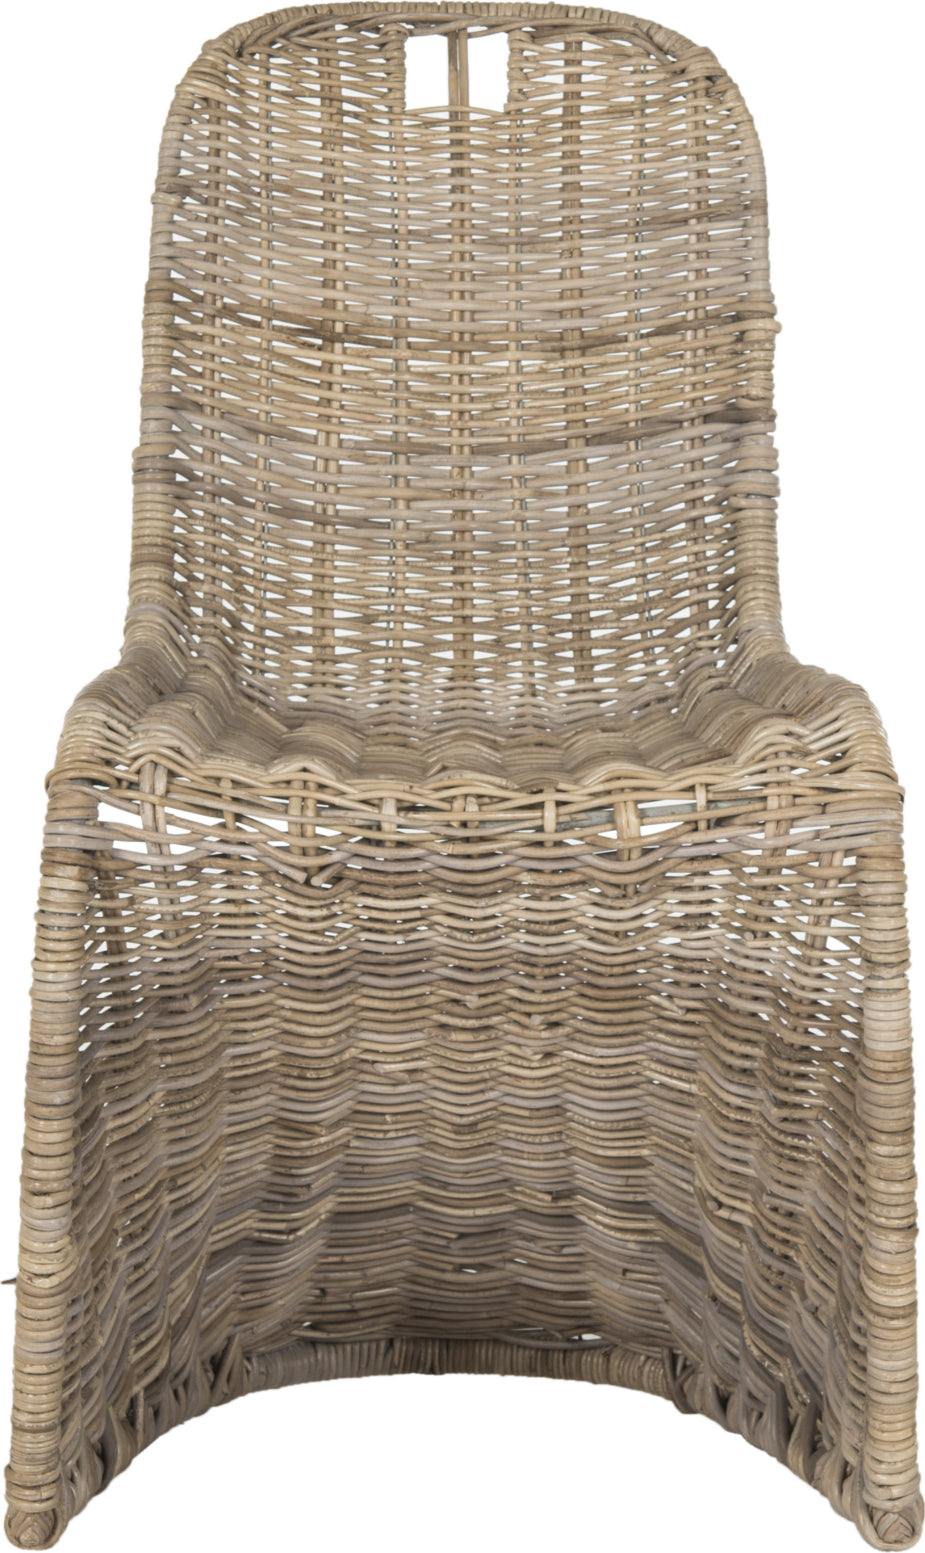 Safavieh Cilombo 19''H Wicker Dining Chair Natural Furniture main image